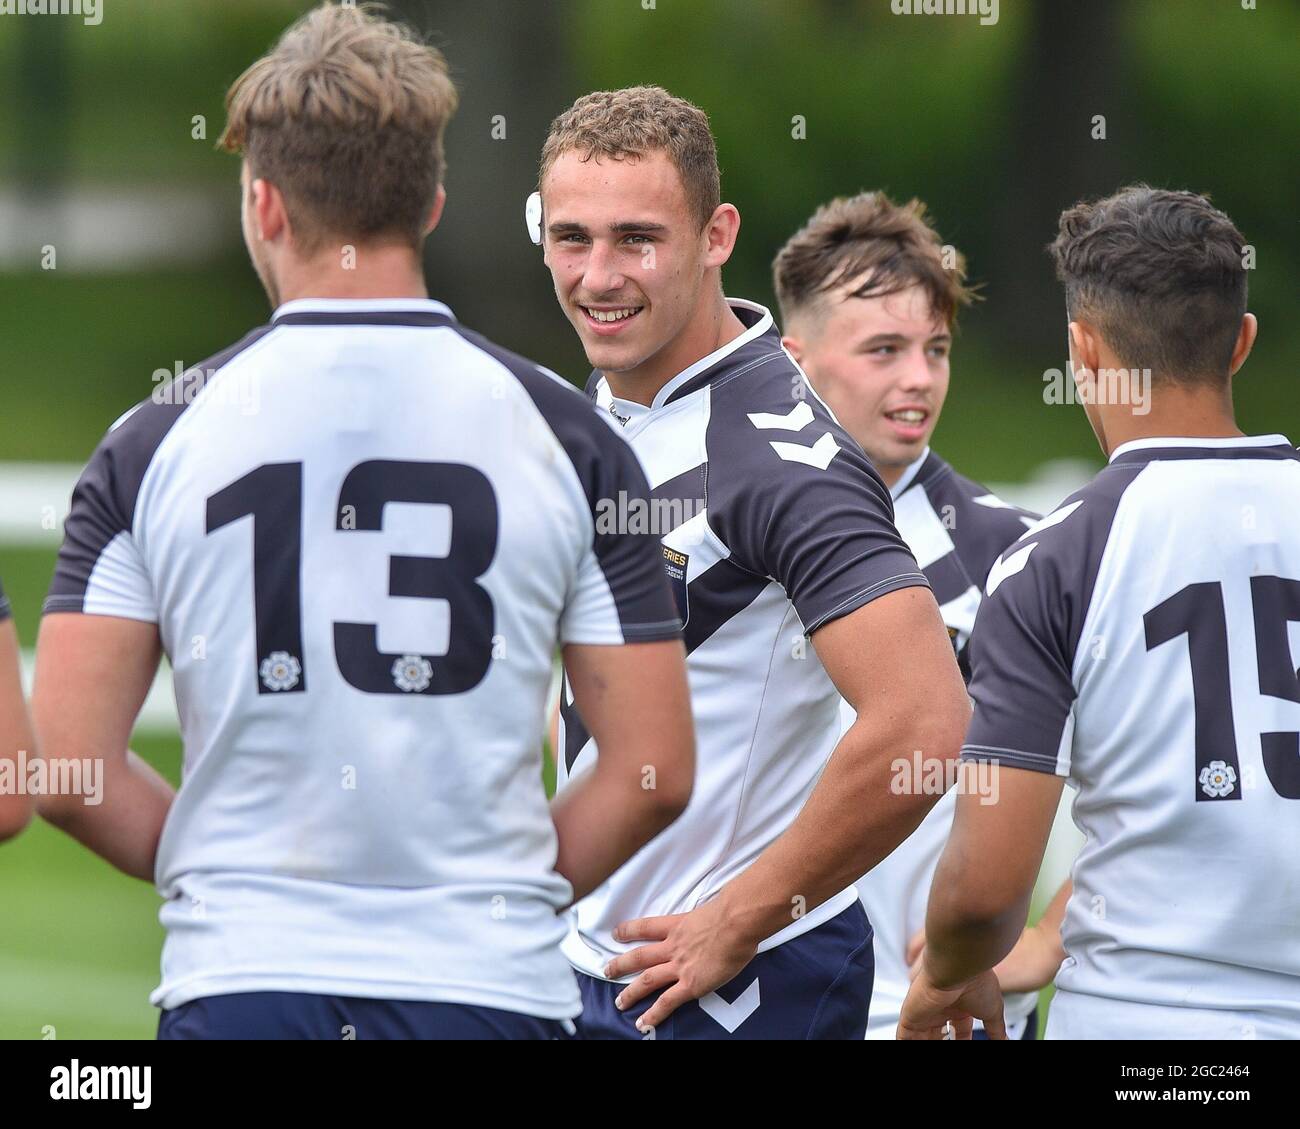 Leeds, England - 4 August 2021 - Isaac Shaw (Wakefield Trinity) of Yorkshire Academy during the Rugby League Roses Academy Match Yorkshire Academy vs Lancashire Academy at Weetwood Hall, Leeds, UK  Dean Williams Stock Photo